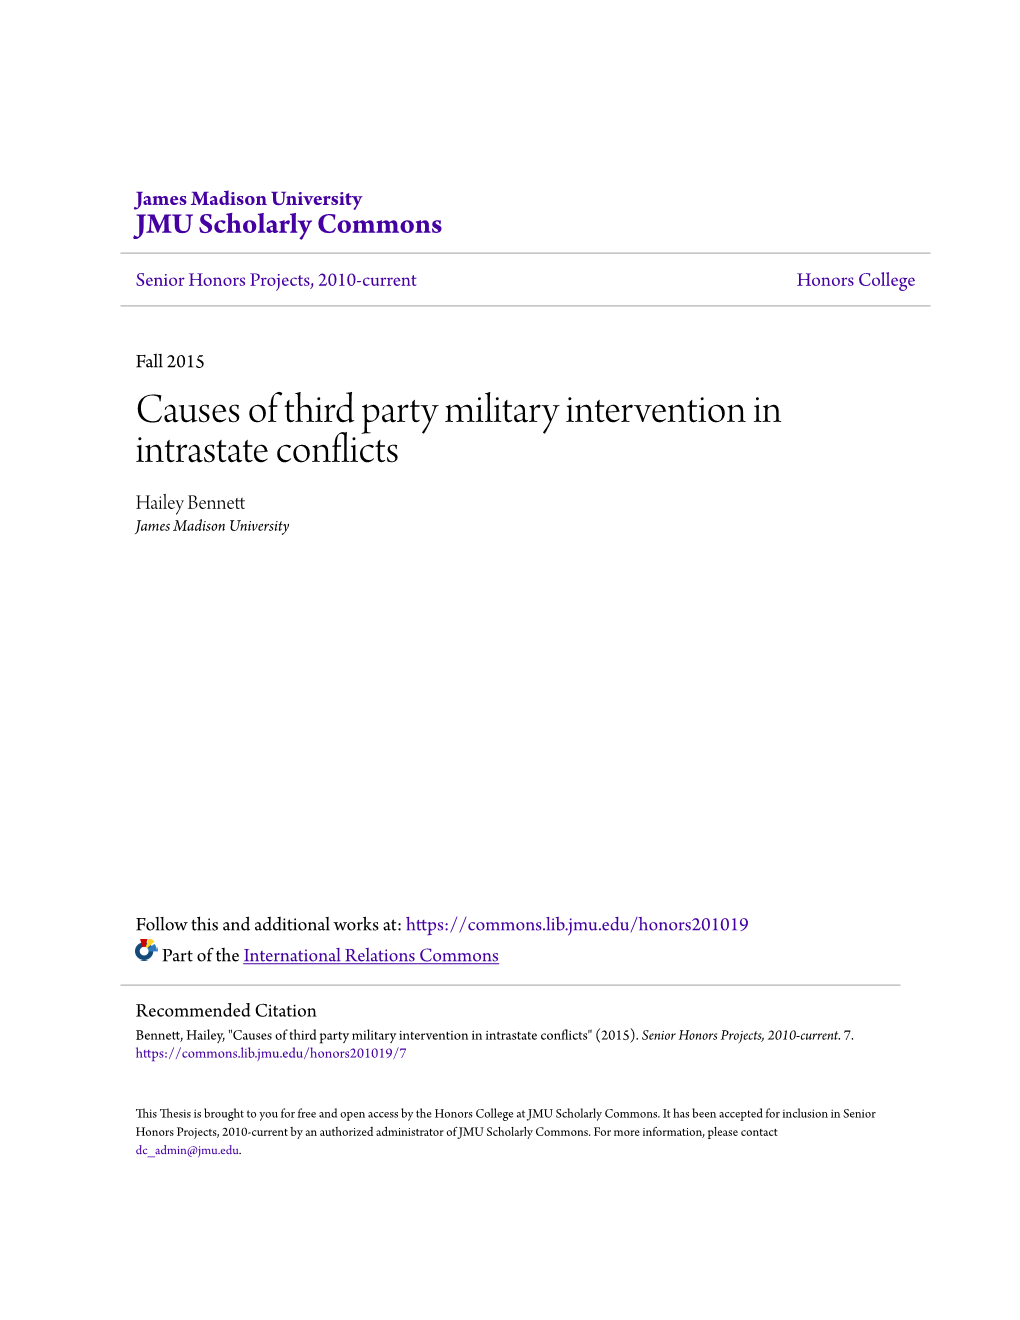 Causes of Third Party Military Intervention in Intrastate Conflicts Hailey Bennett James Madison University